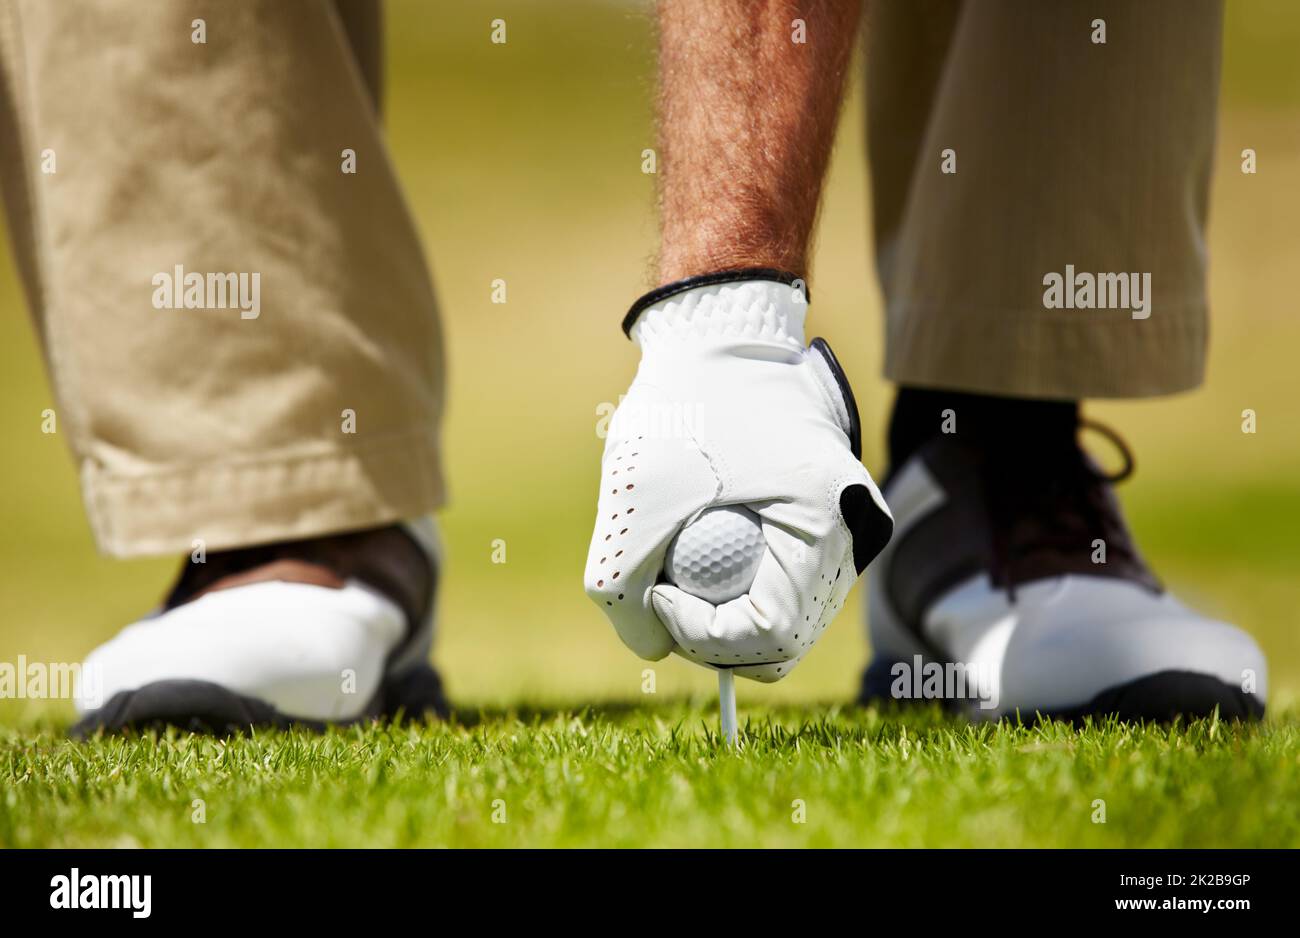 Setting up. Cropped image of a golfer putting his golfball on the tee. Stock Photo